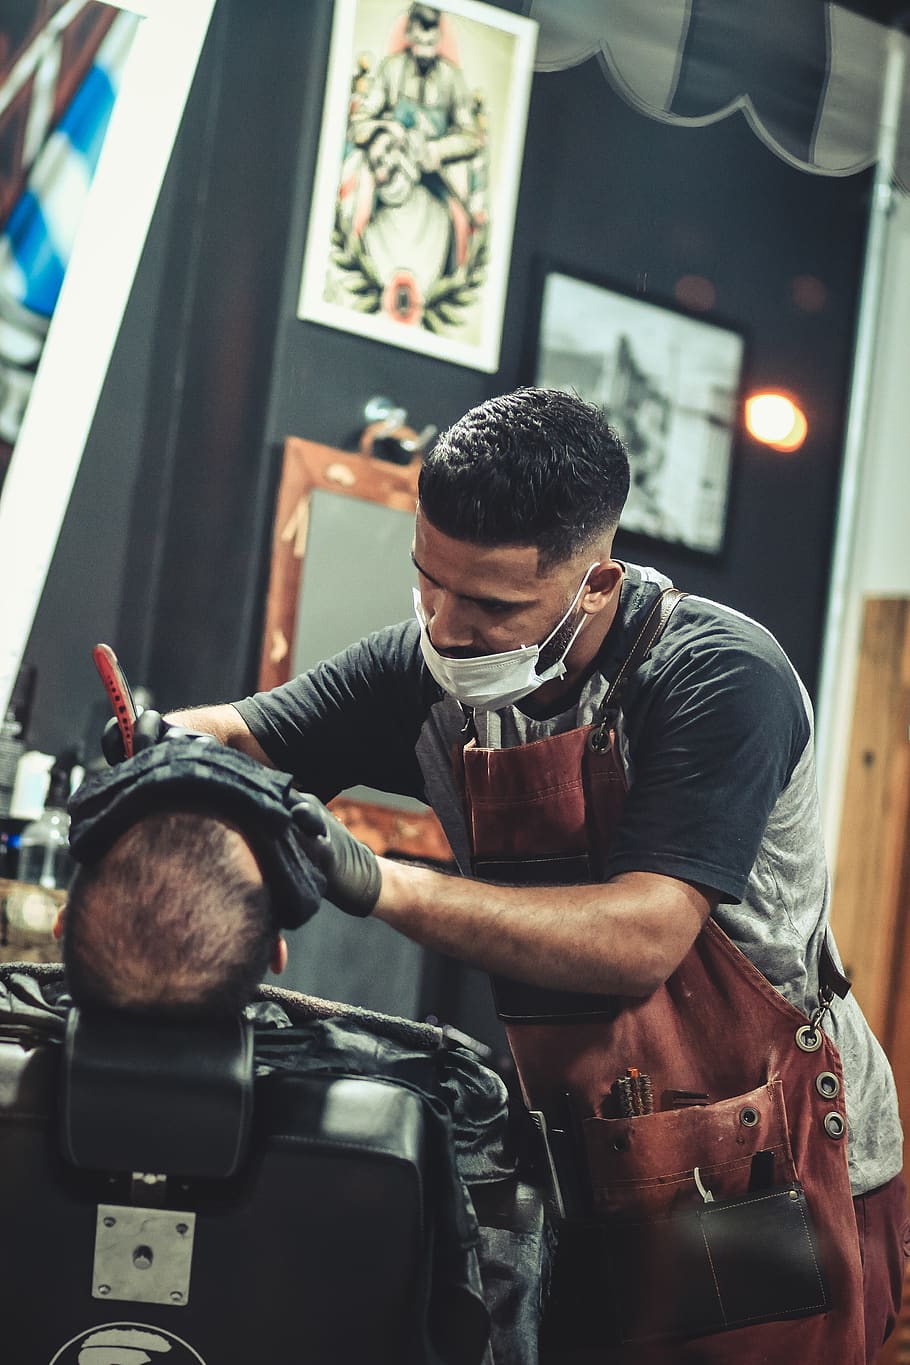 These are the best barbers around Dallas, according to Yelp reviewers